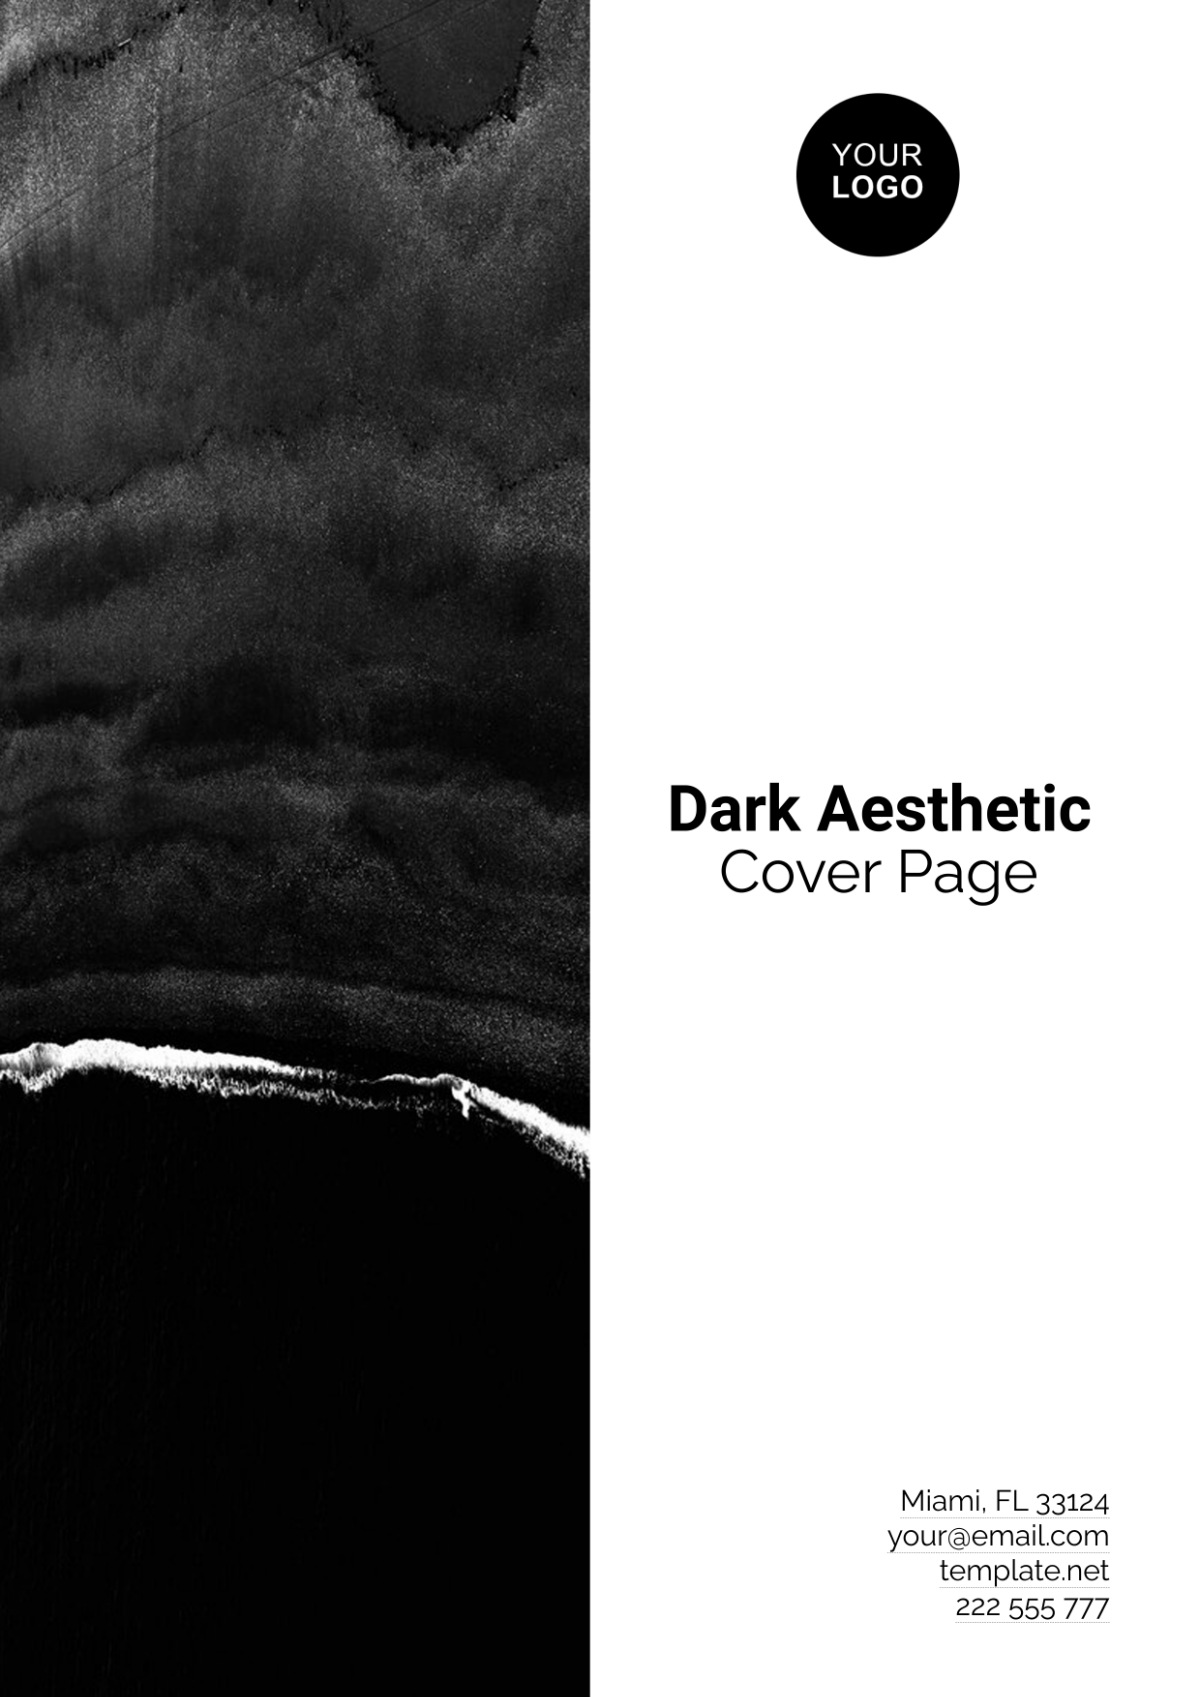 Dark Aesthetic Cover Page Template